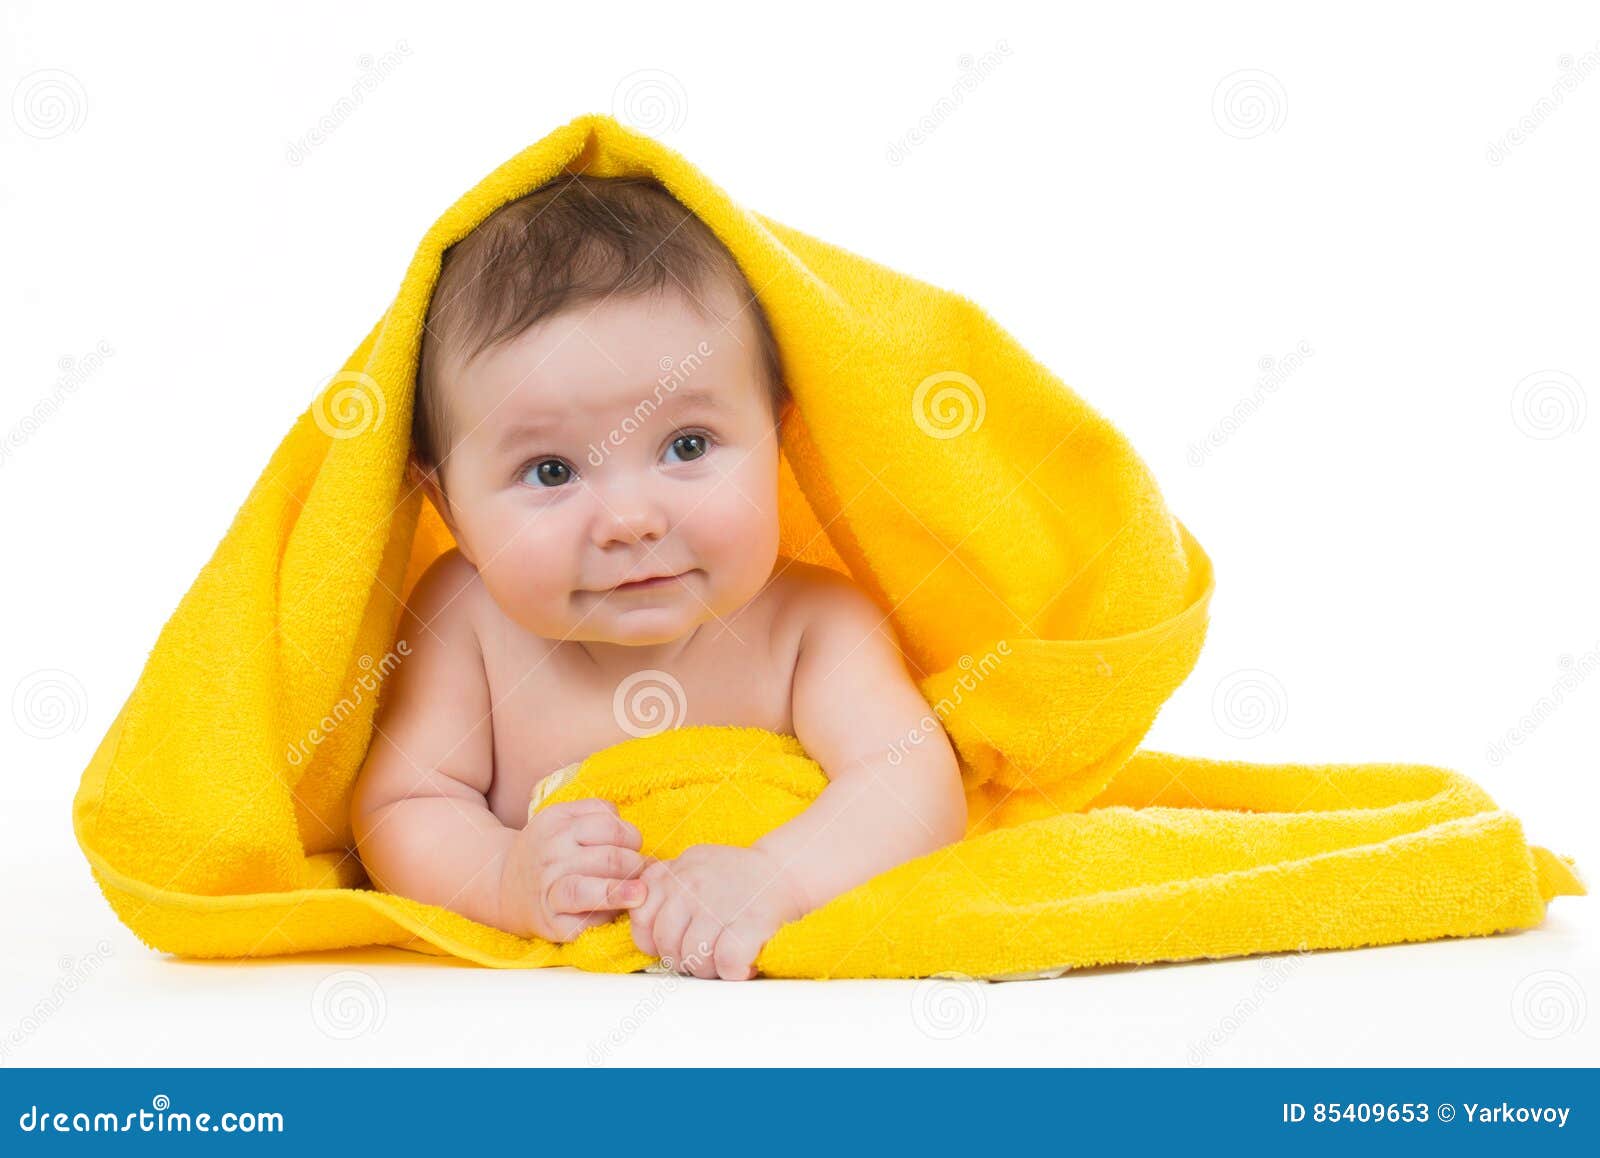 Newborn Baby Lying Down and Smiling in a Yellow Towel Stock Image ...